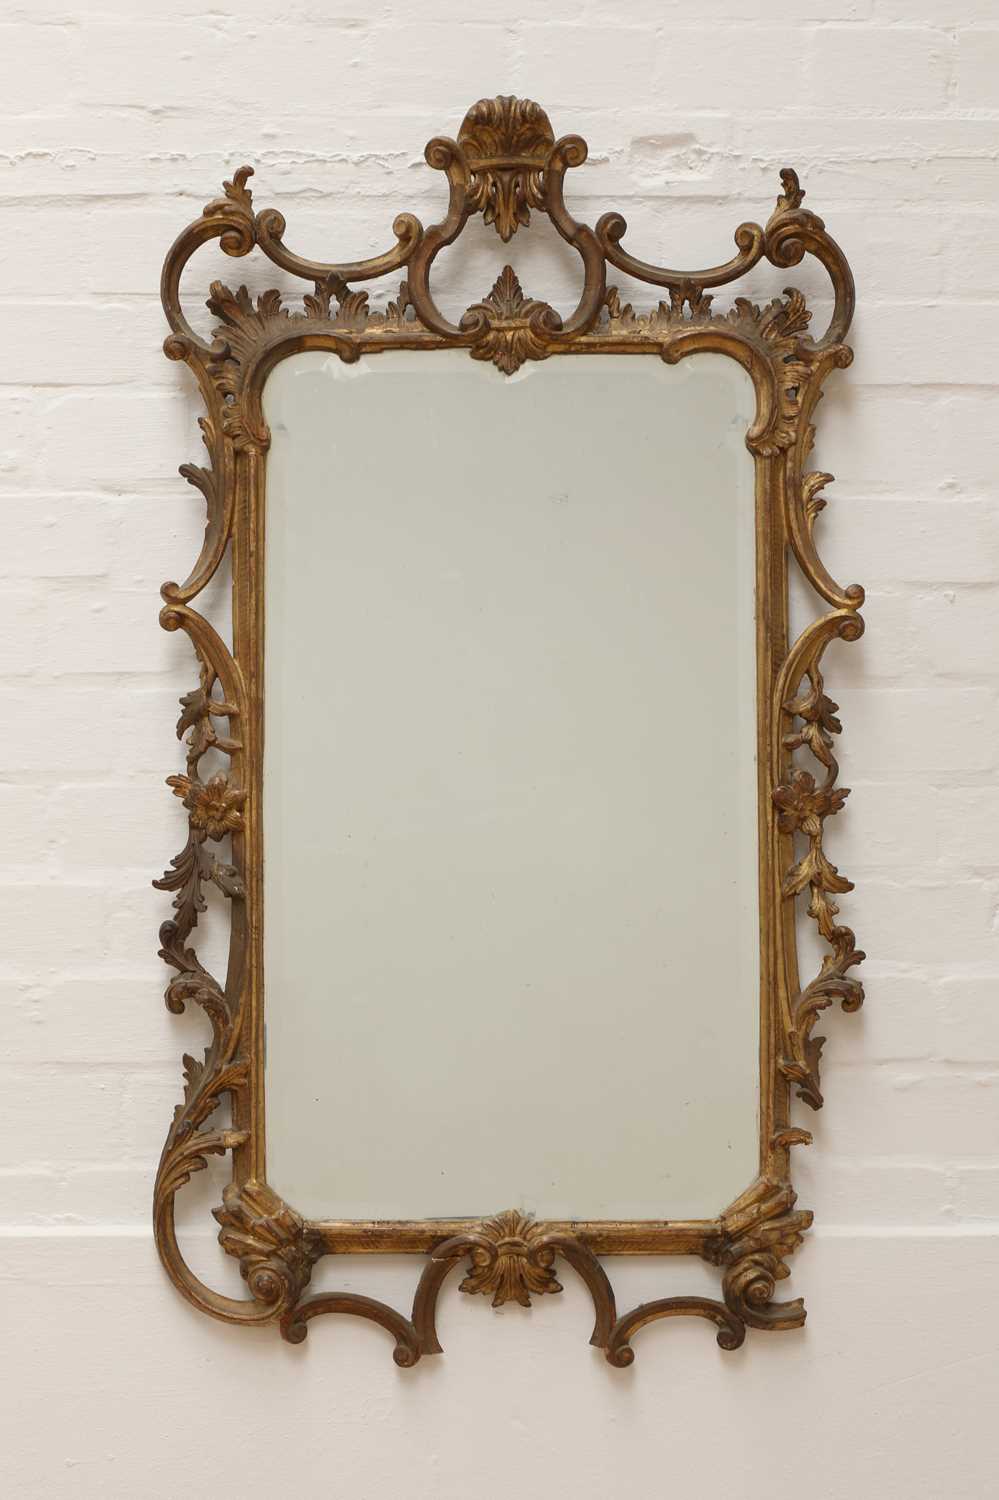 Lot 71 - A George III-style carved giltwood wall mirror